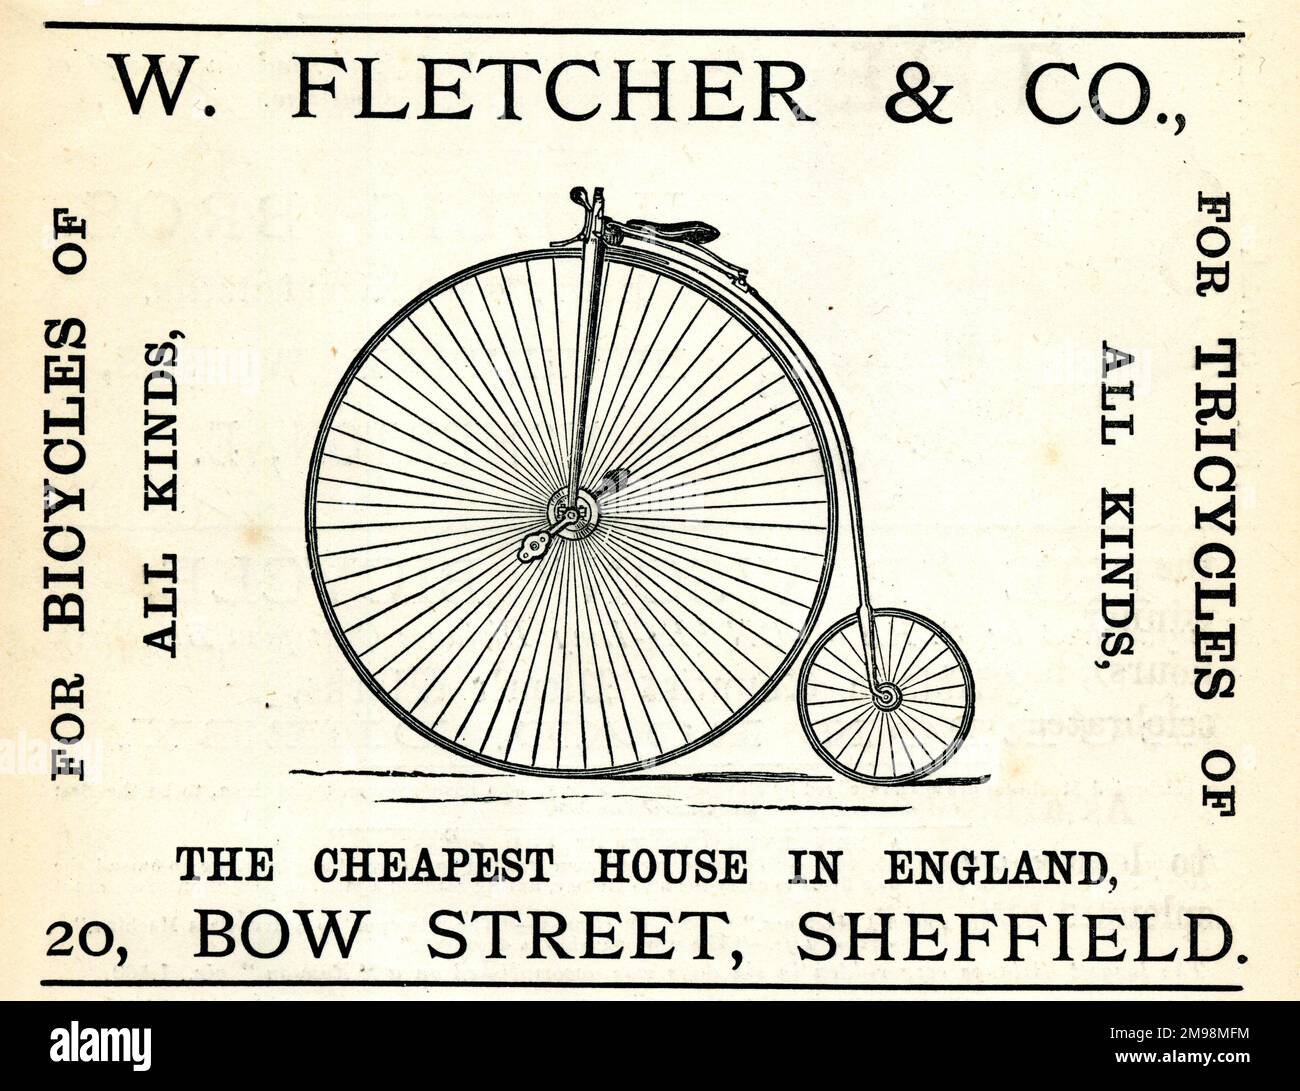 Advertisement, W Fletcher & Co, Bow Street, Sheffield, for bicycles and tricycles. Stock Photo